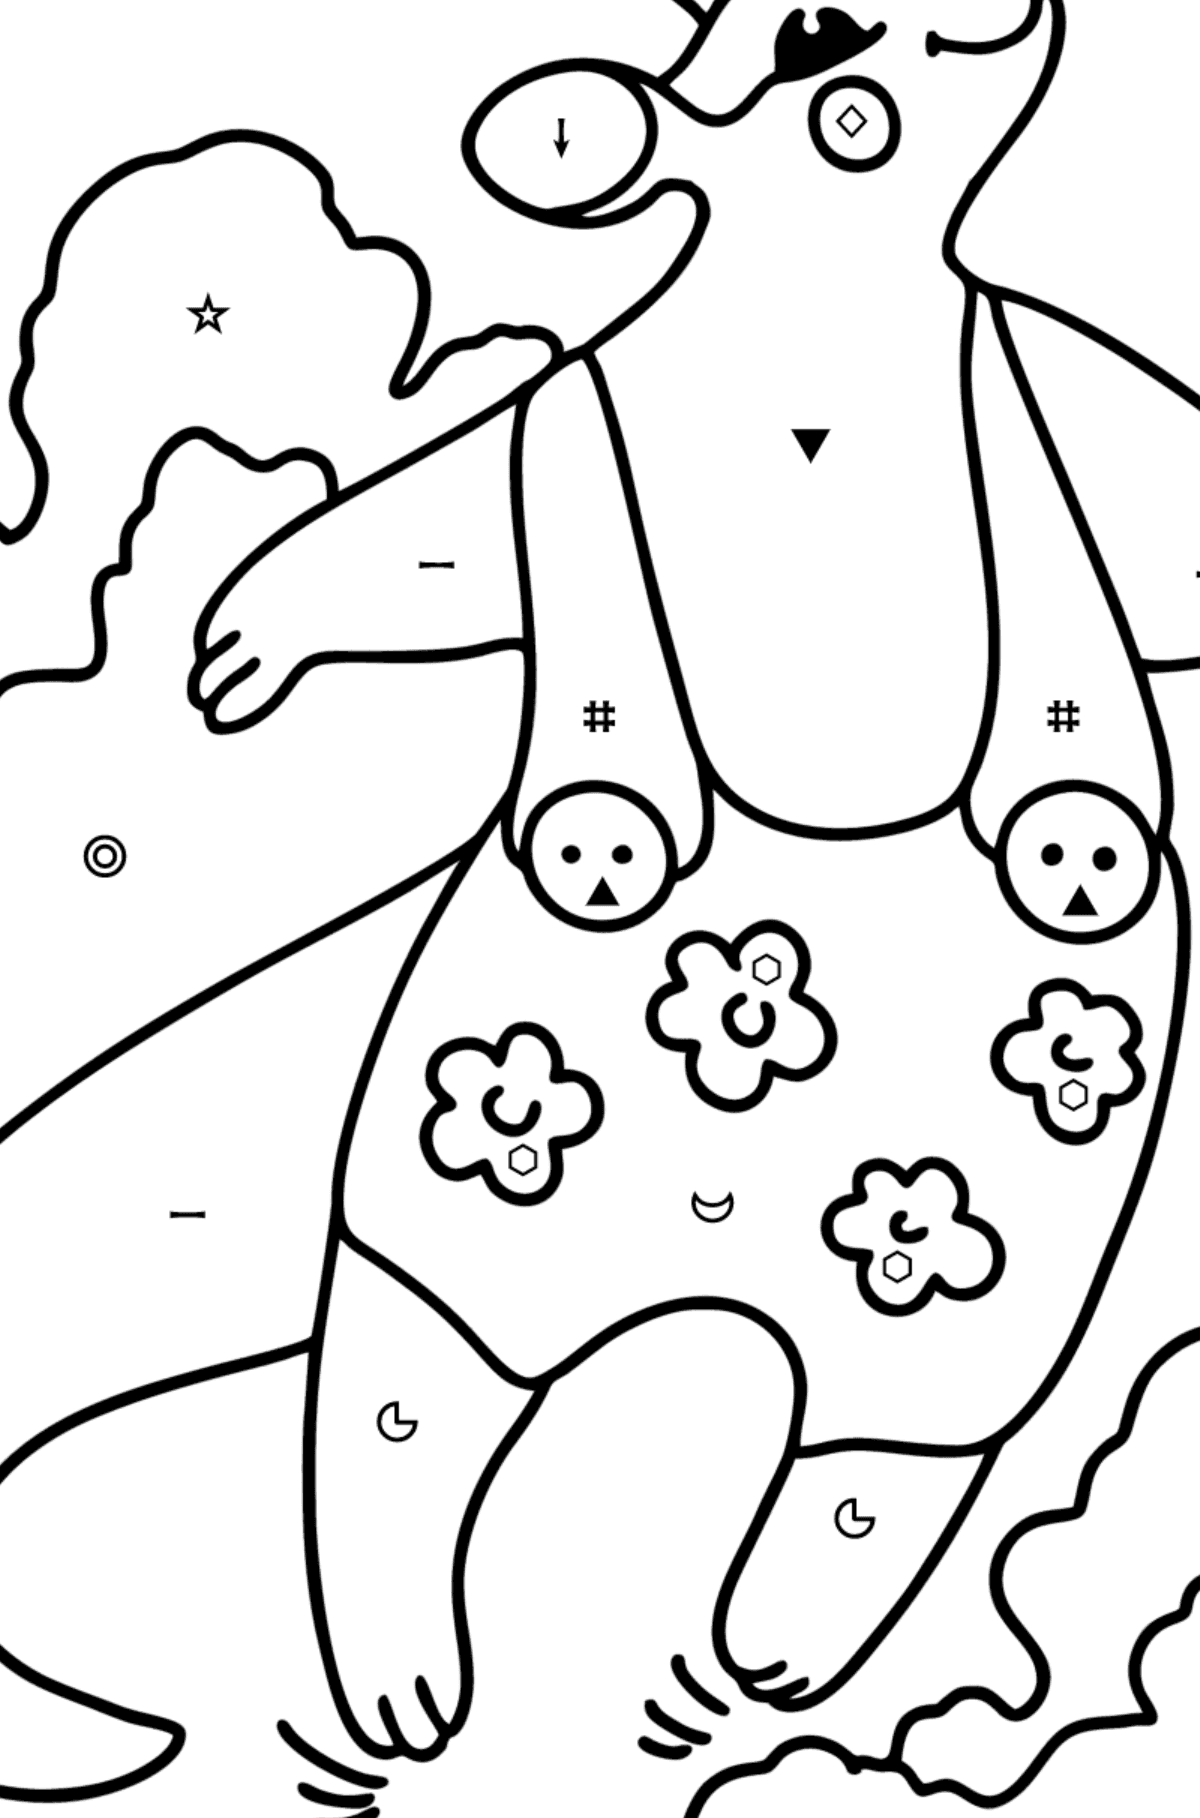 Coloring page - Cartoon Kangaroo jumping - Coloring by Symbols and Geometric Shapes for Kids